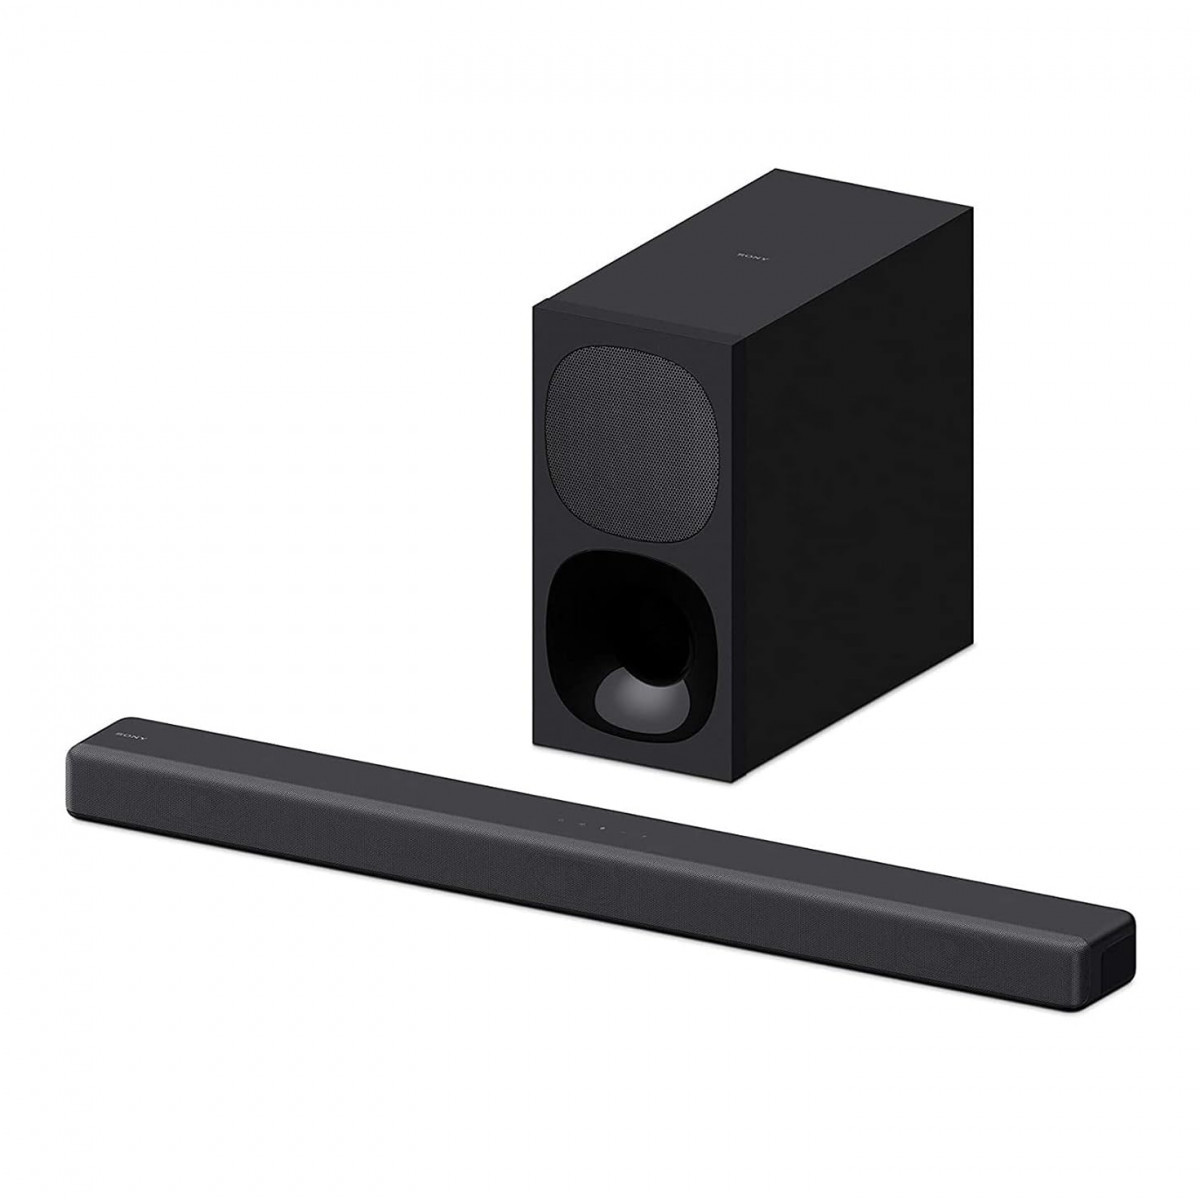 Sony HT-G700 31ch 4K Dolby AtmosDTSX Soundbar for TV with Wireless subwoofer 31ch Home Theater System 400W Surround SoundBluetooth Connectivity HDMI  Optical Connectivity 4k HDR - Black